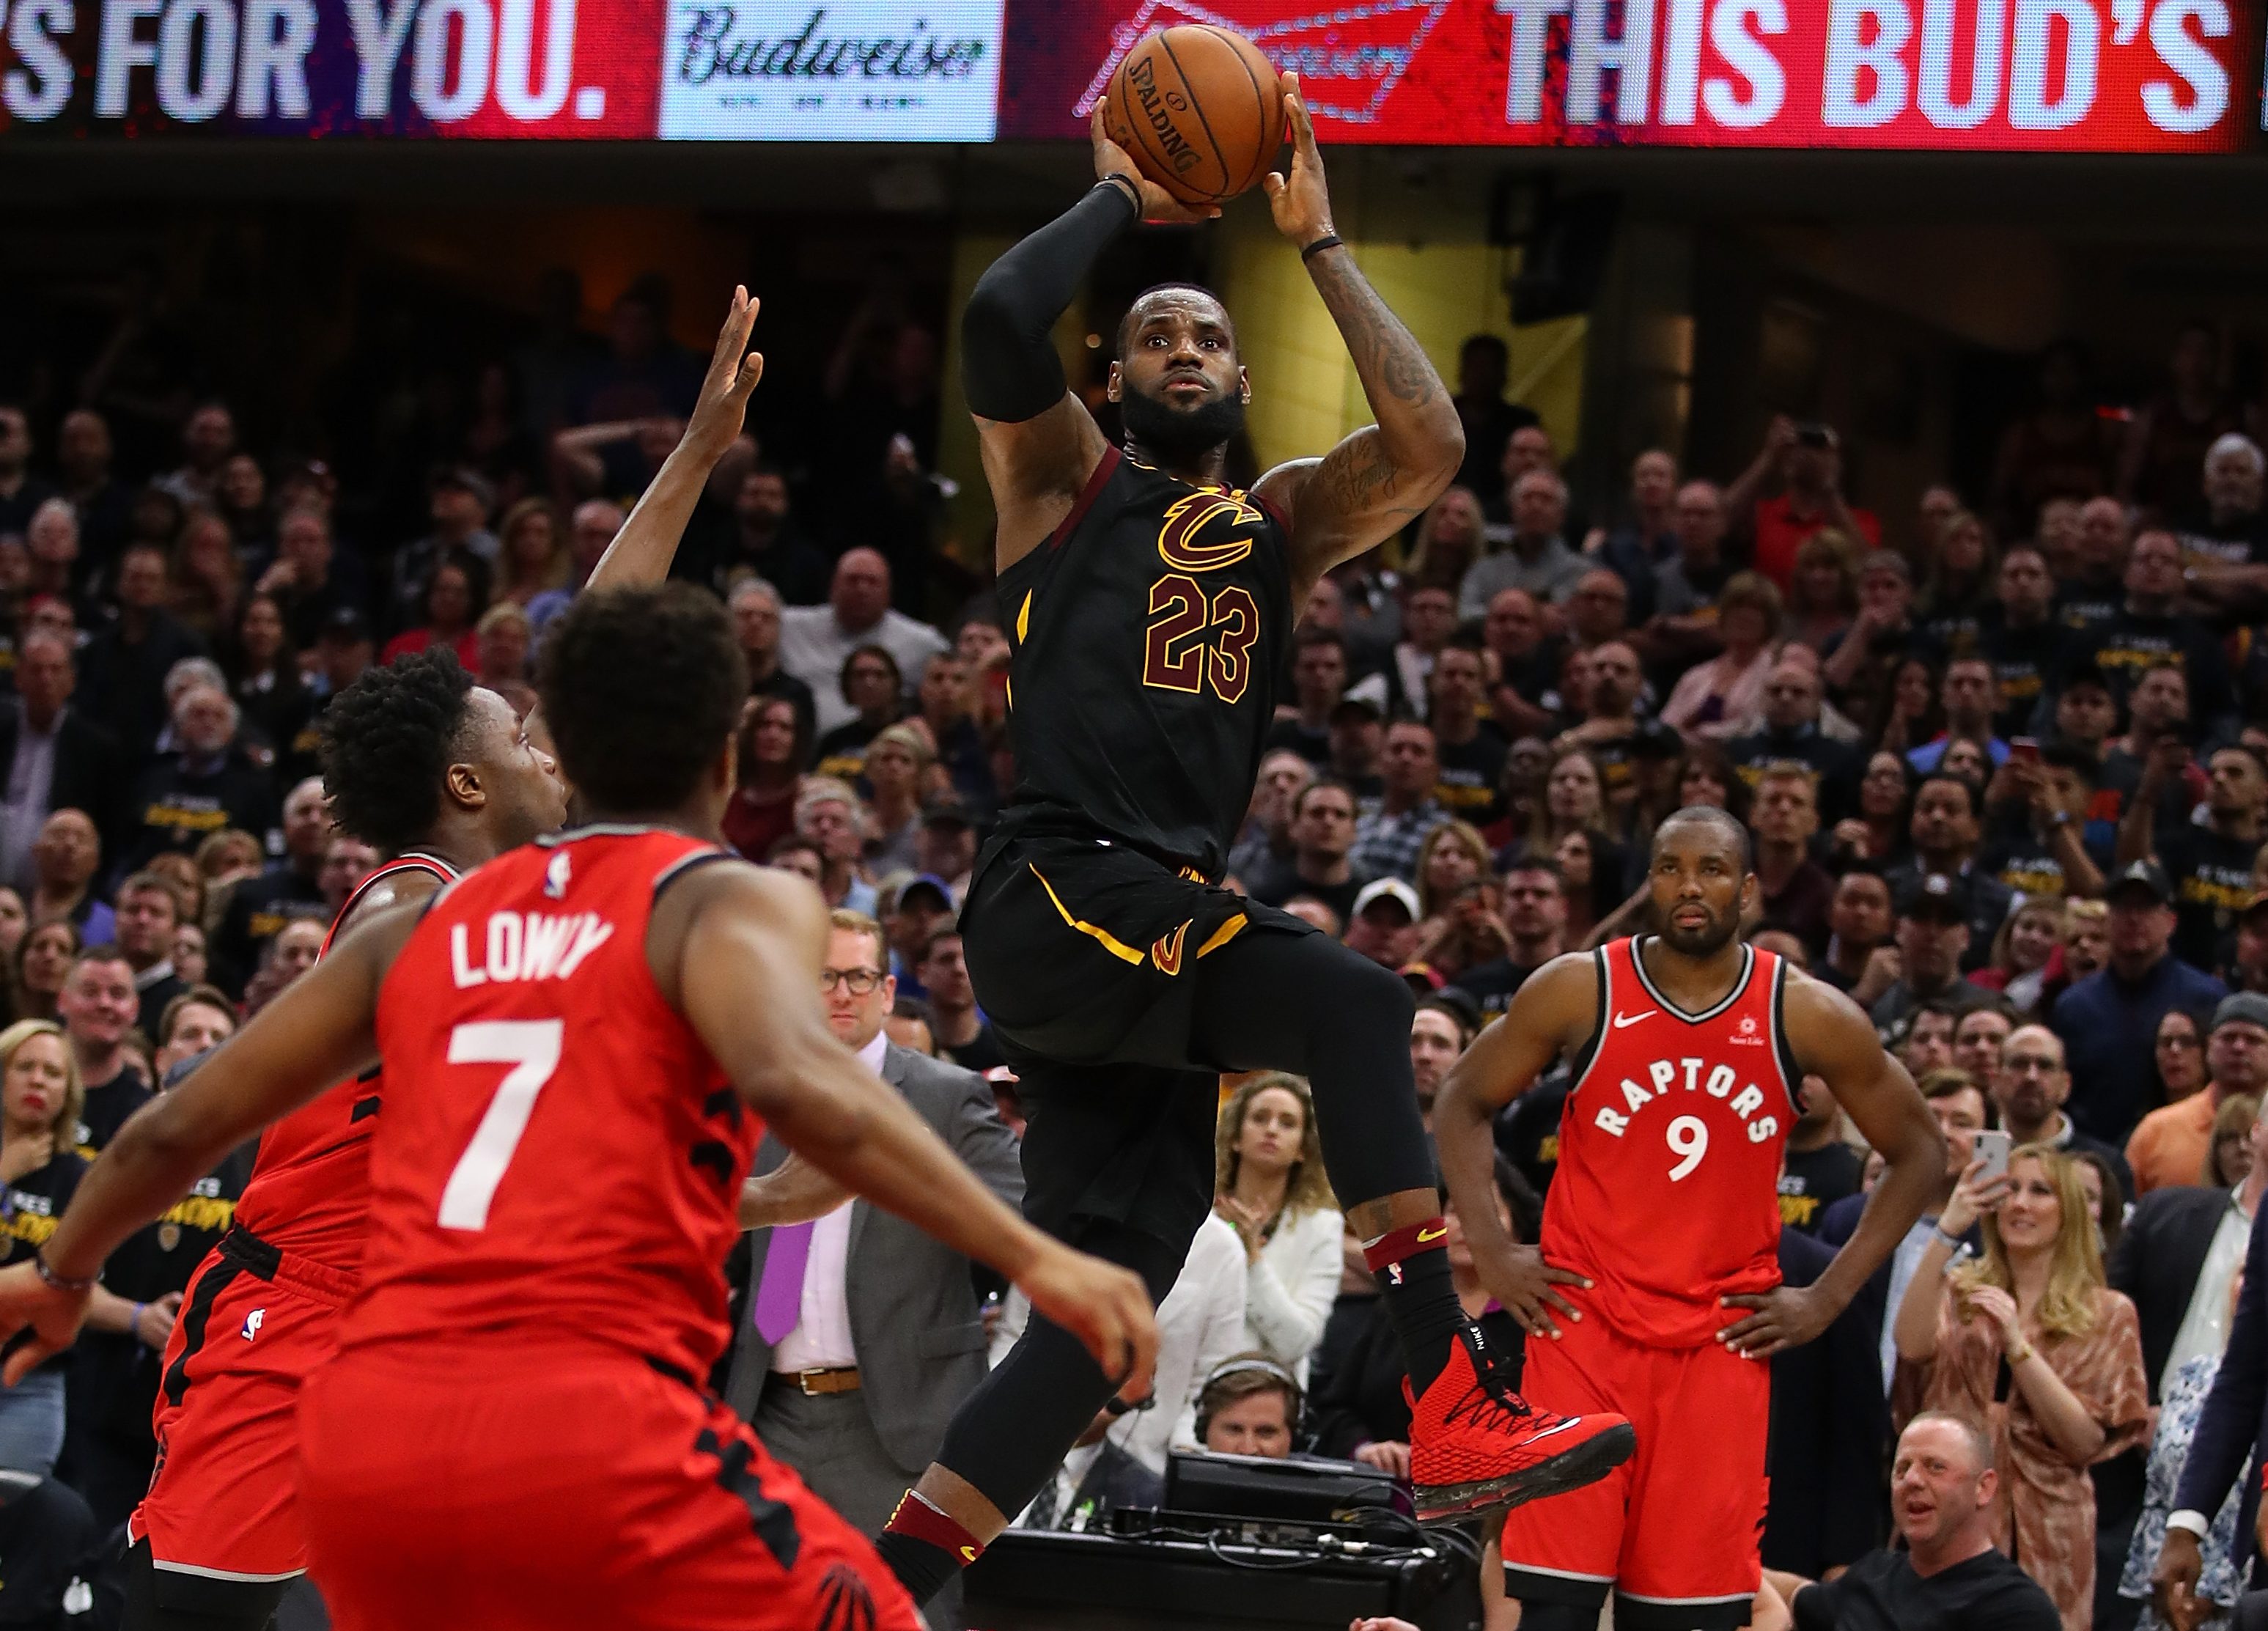 LeBron James #23 of the Cleveland Cavaliers hits the game winning shot over the outstretched hand of OG Anunoby #3 of the Toronto Raptors to win Game Three of the Eastern Conference Semifinals. (Photo by Gregory Shamus/Getty Images)